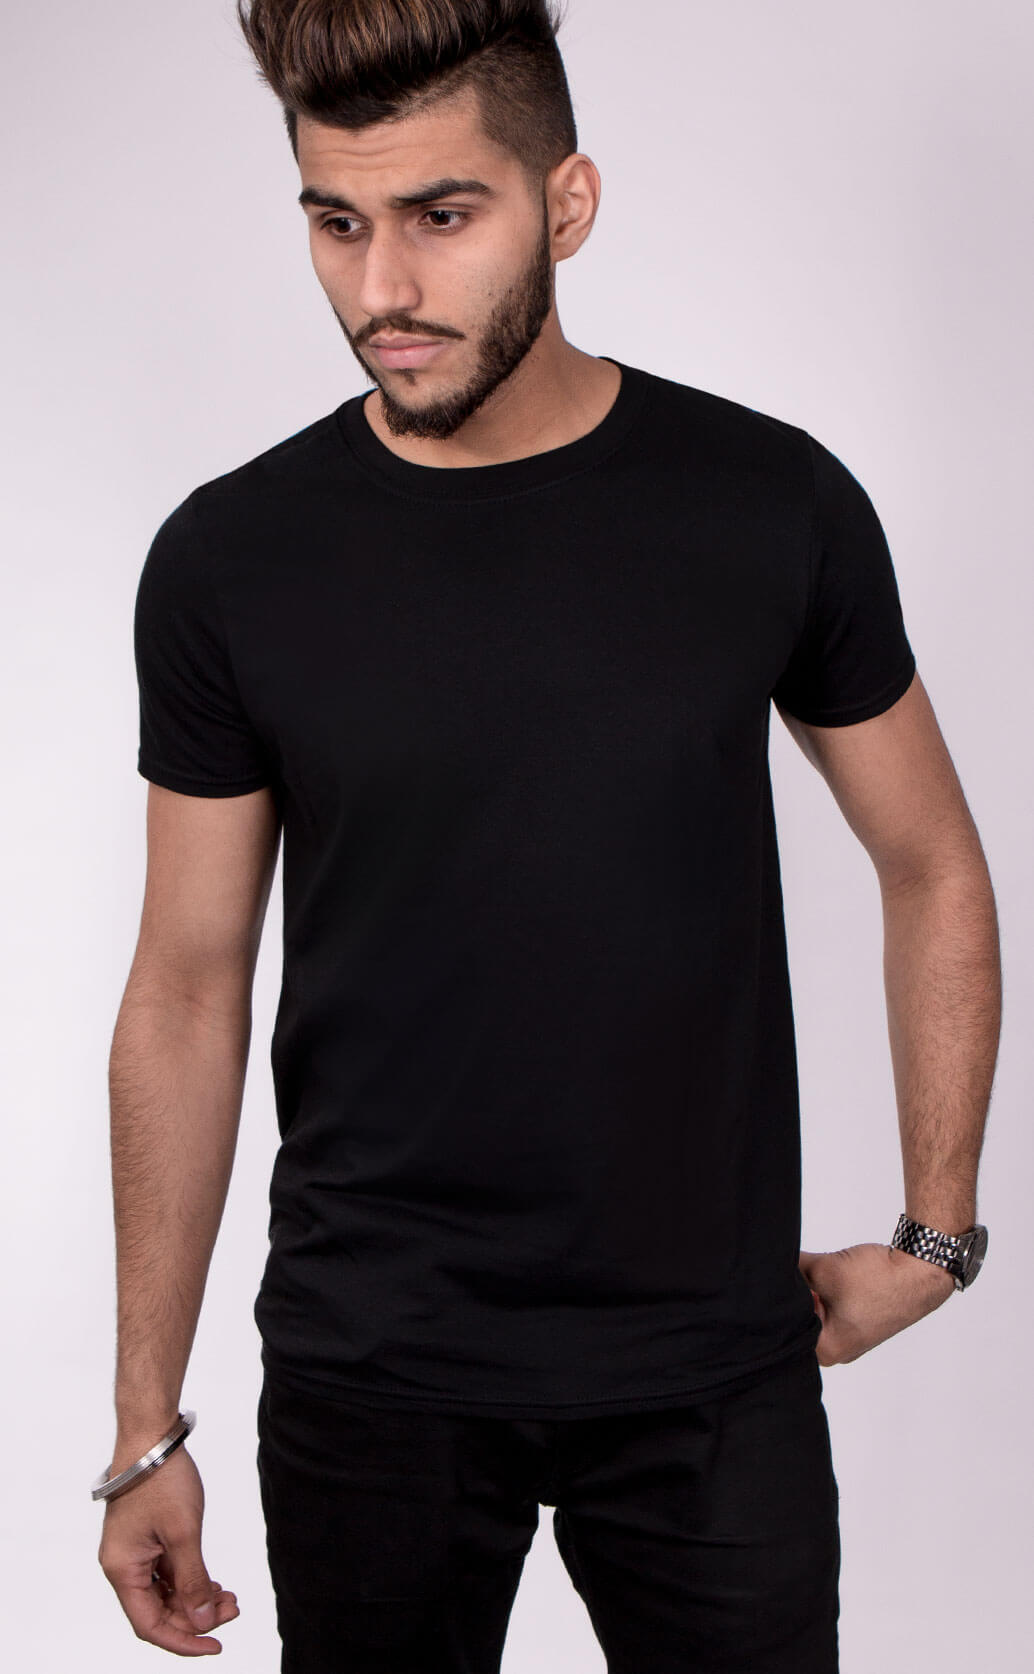 Size guide image for Mens Style Fit shirt type. Model is dressed in black